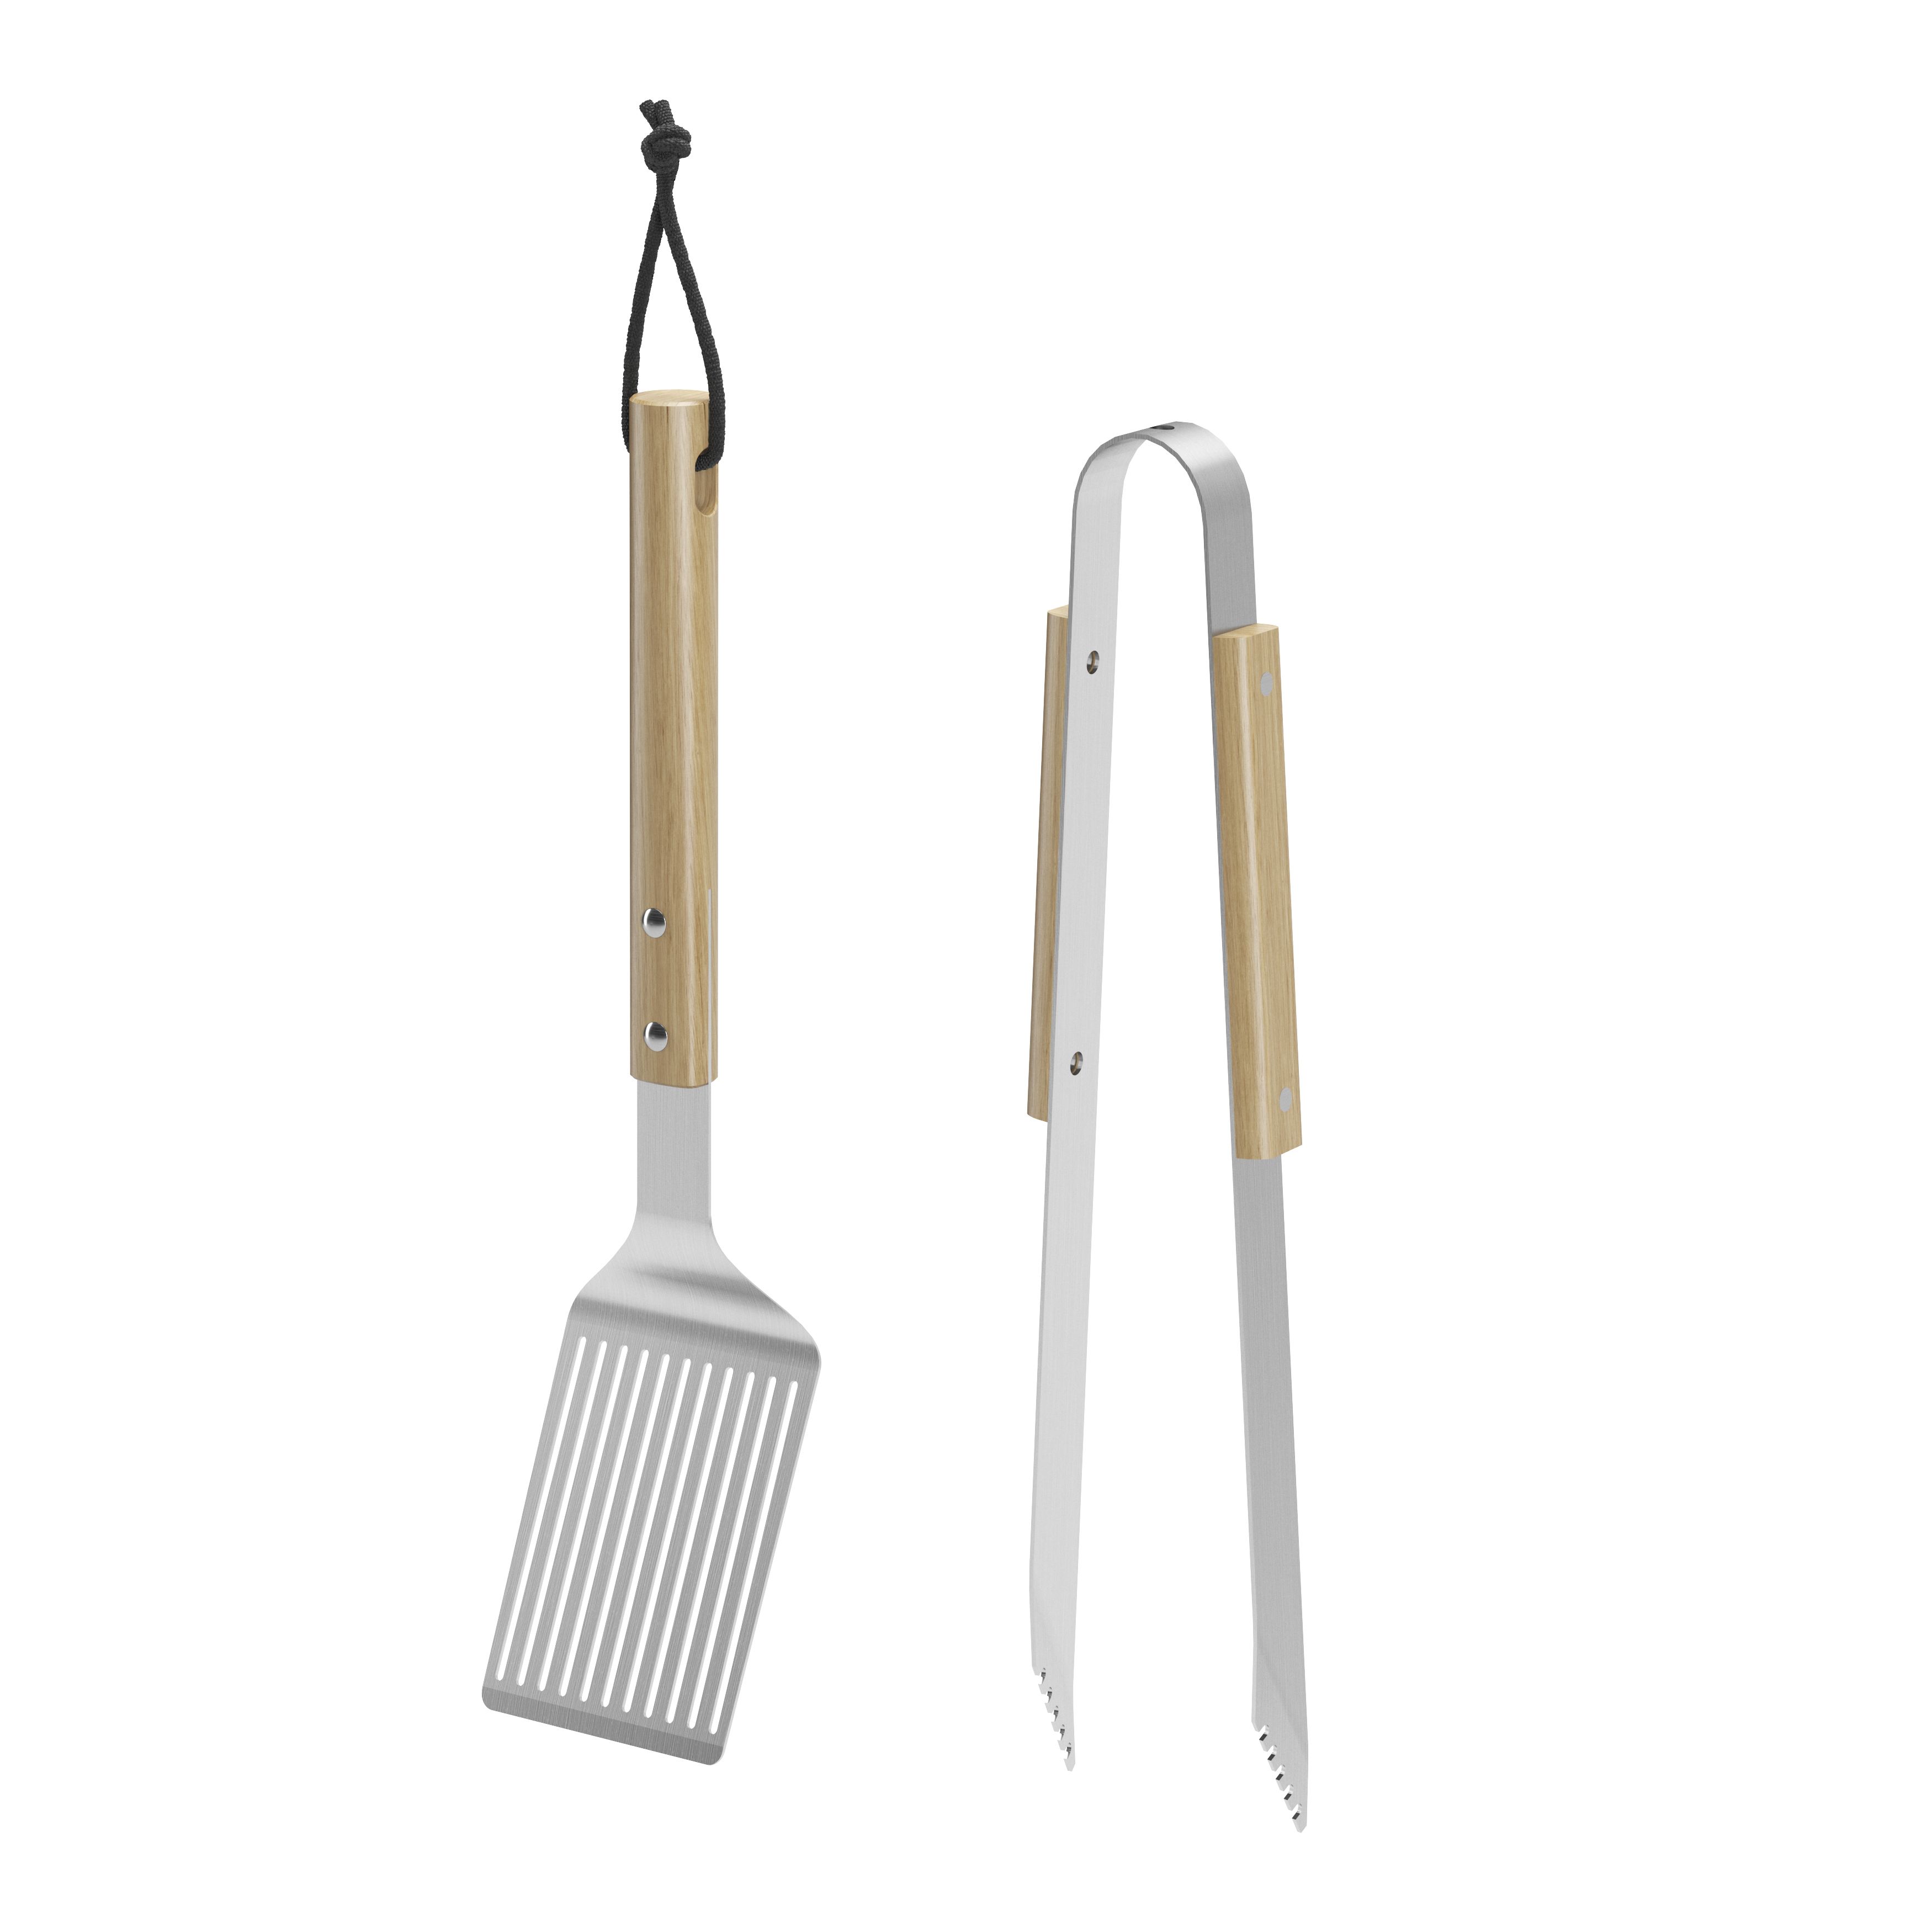 https://media.diy.com/is/image/Kingfisher/goodhome-natural-beech-stainless-steel-2-piece-barbecue-tool-set~5059340351483_01c?$MOB_PREV$&$width=618&$height=618